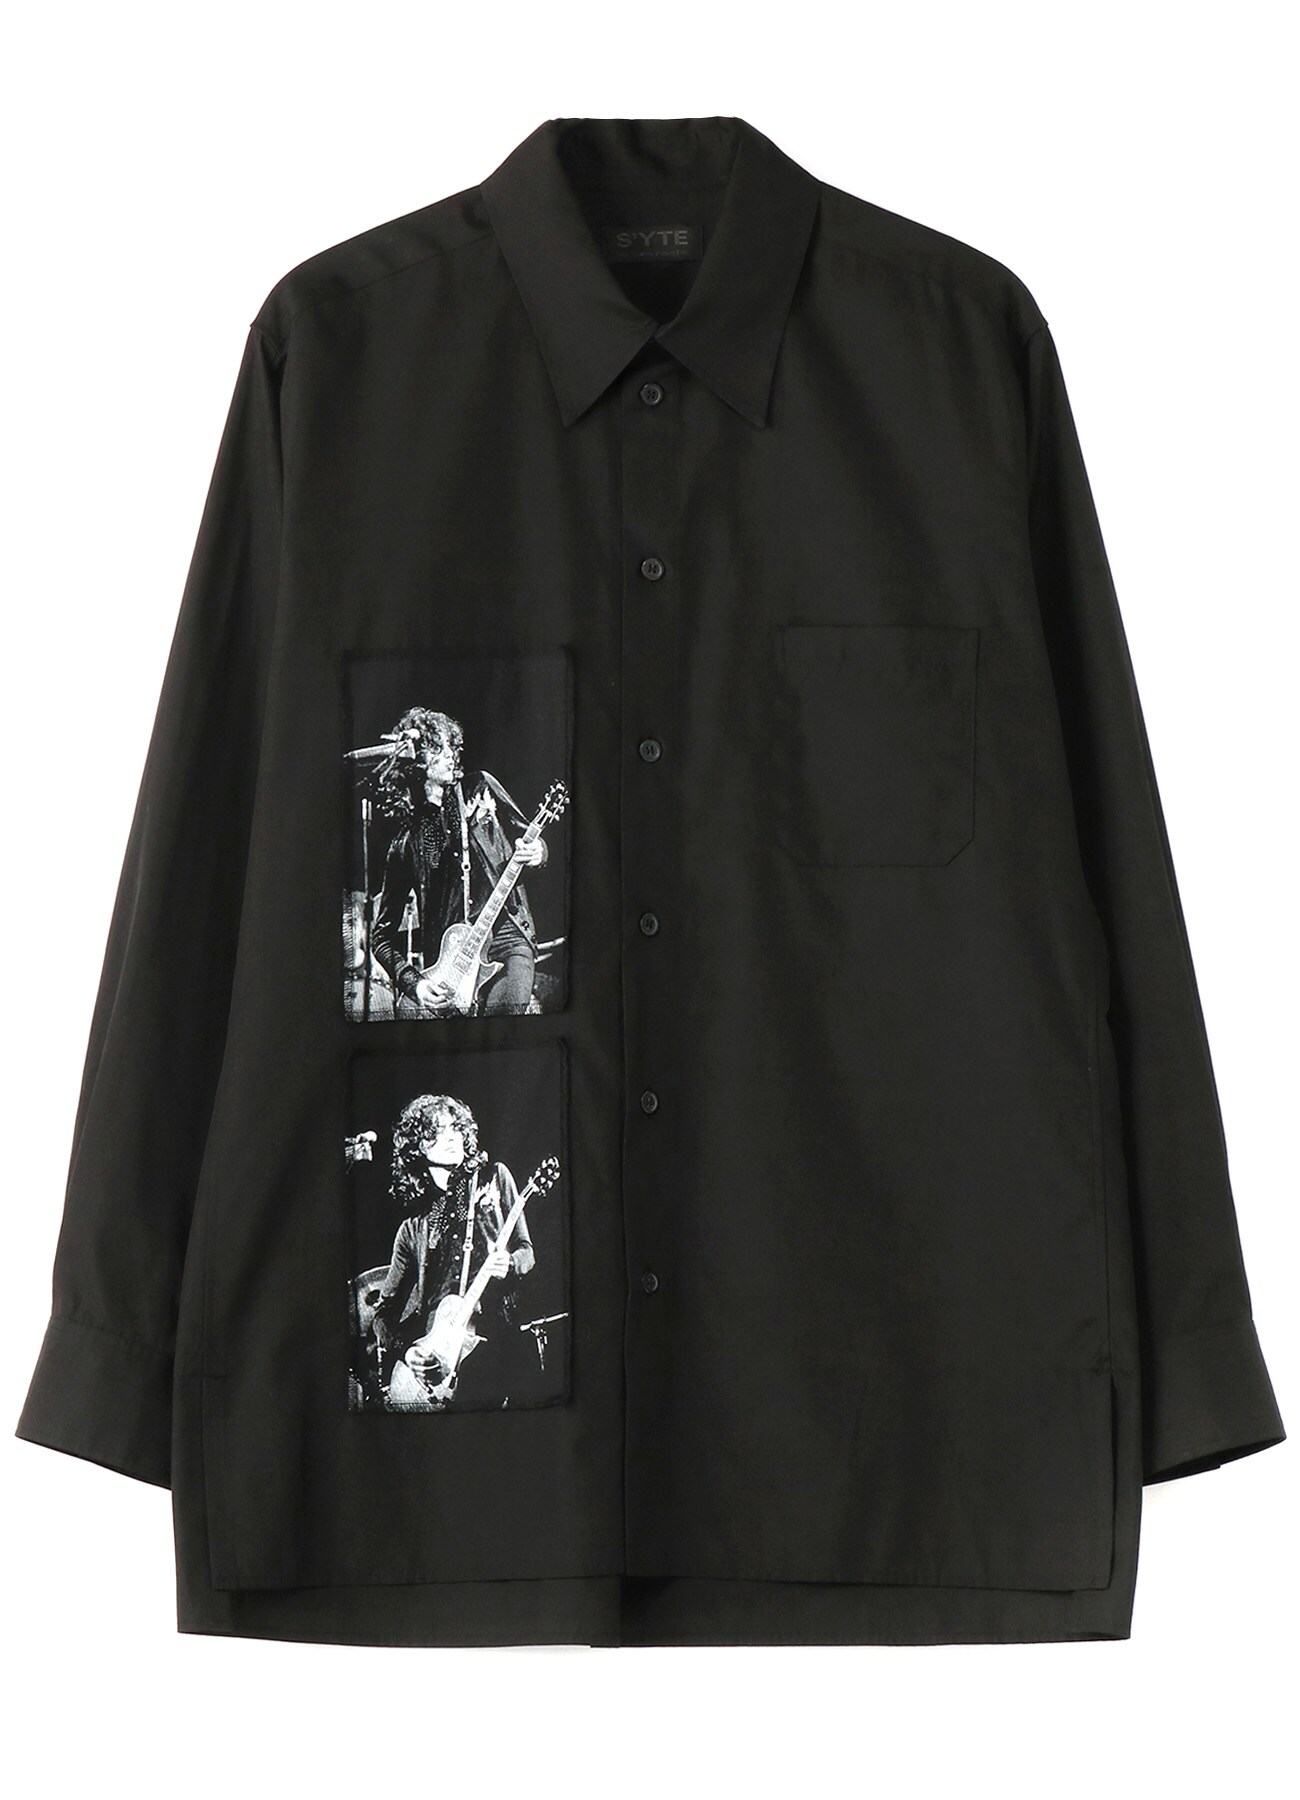 S’YTE × marquee club(R) 1968 100/2 Broad Omnibus Printed Patch Shirt